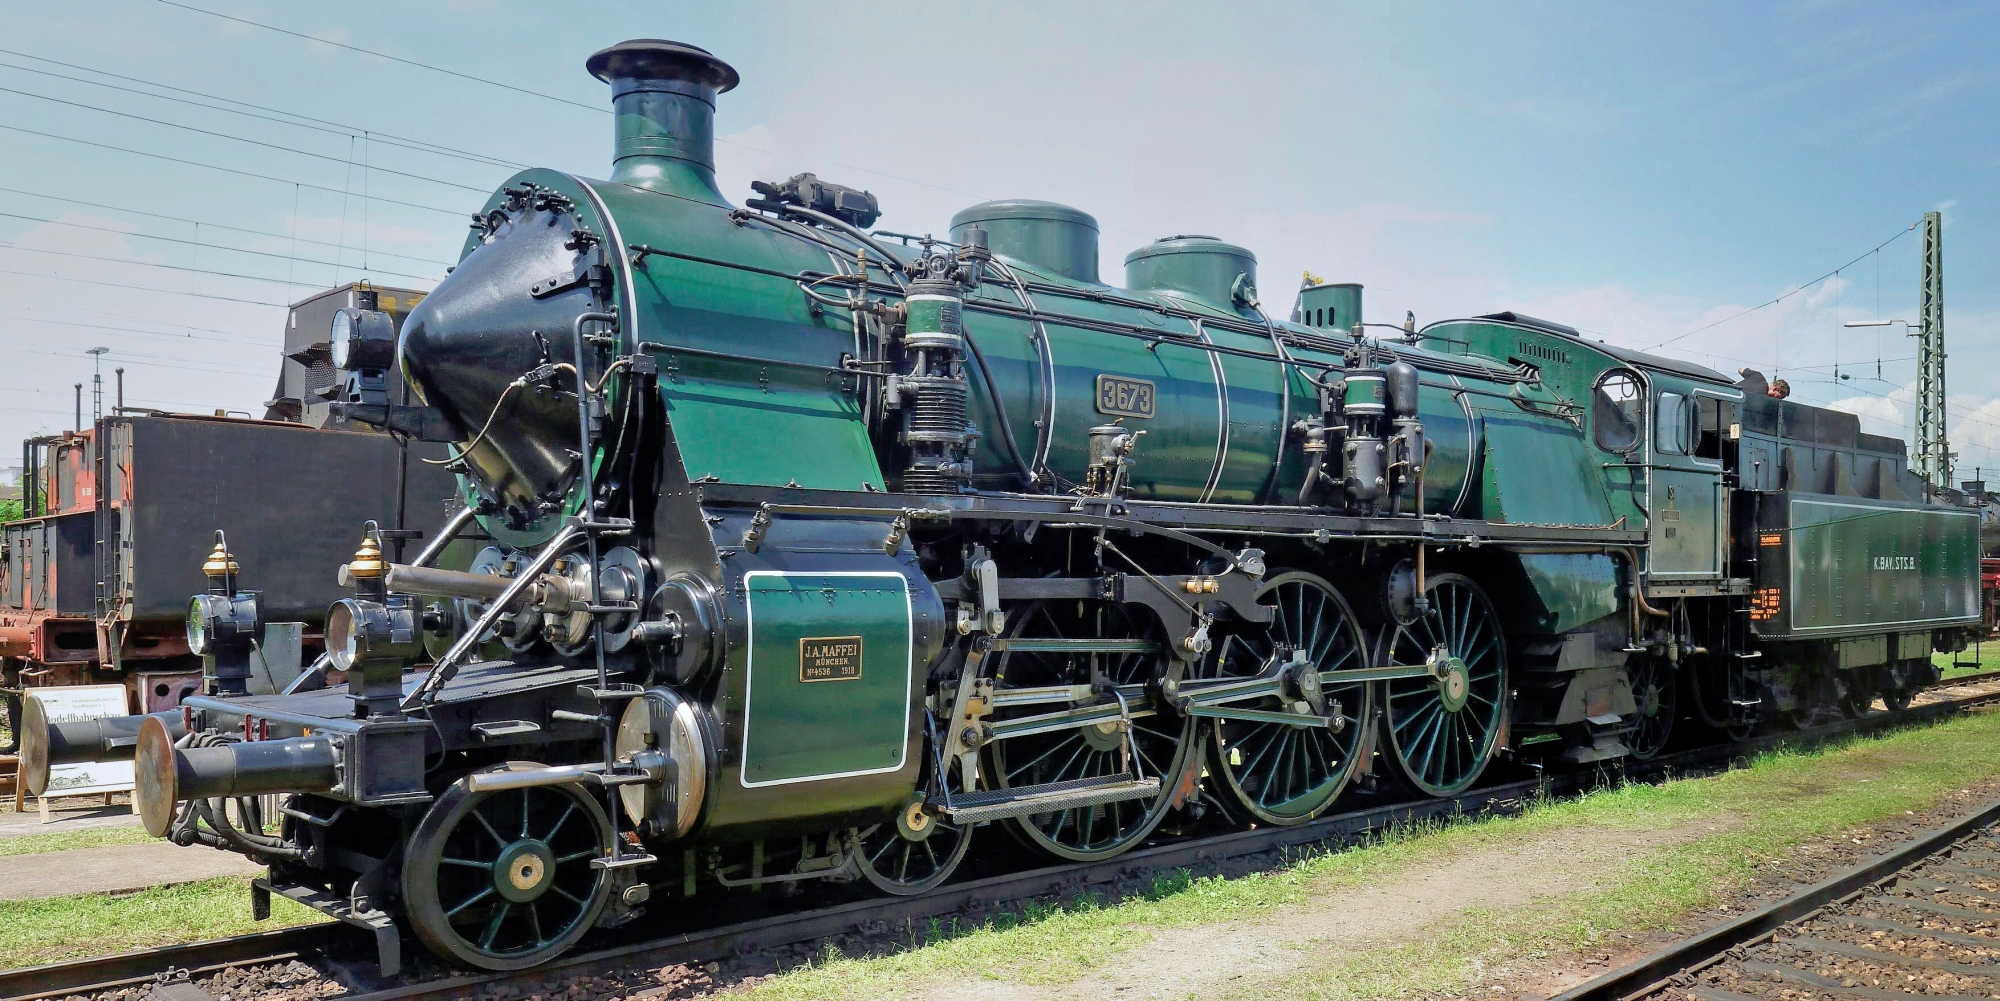 18 478 in the original paint scheme as No. 3673 of the K.Bay.Sts.B.